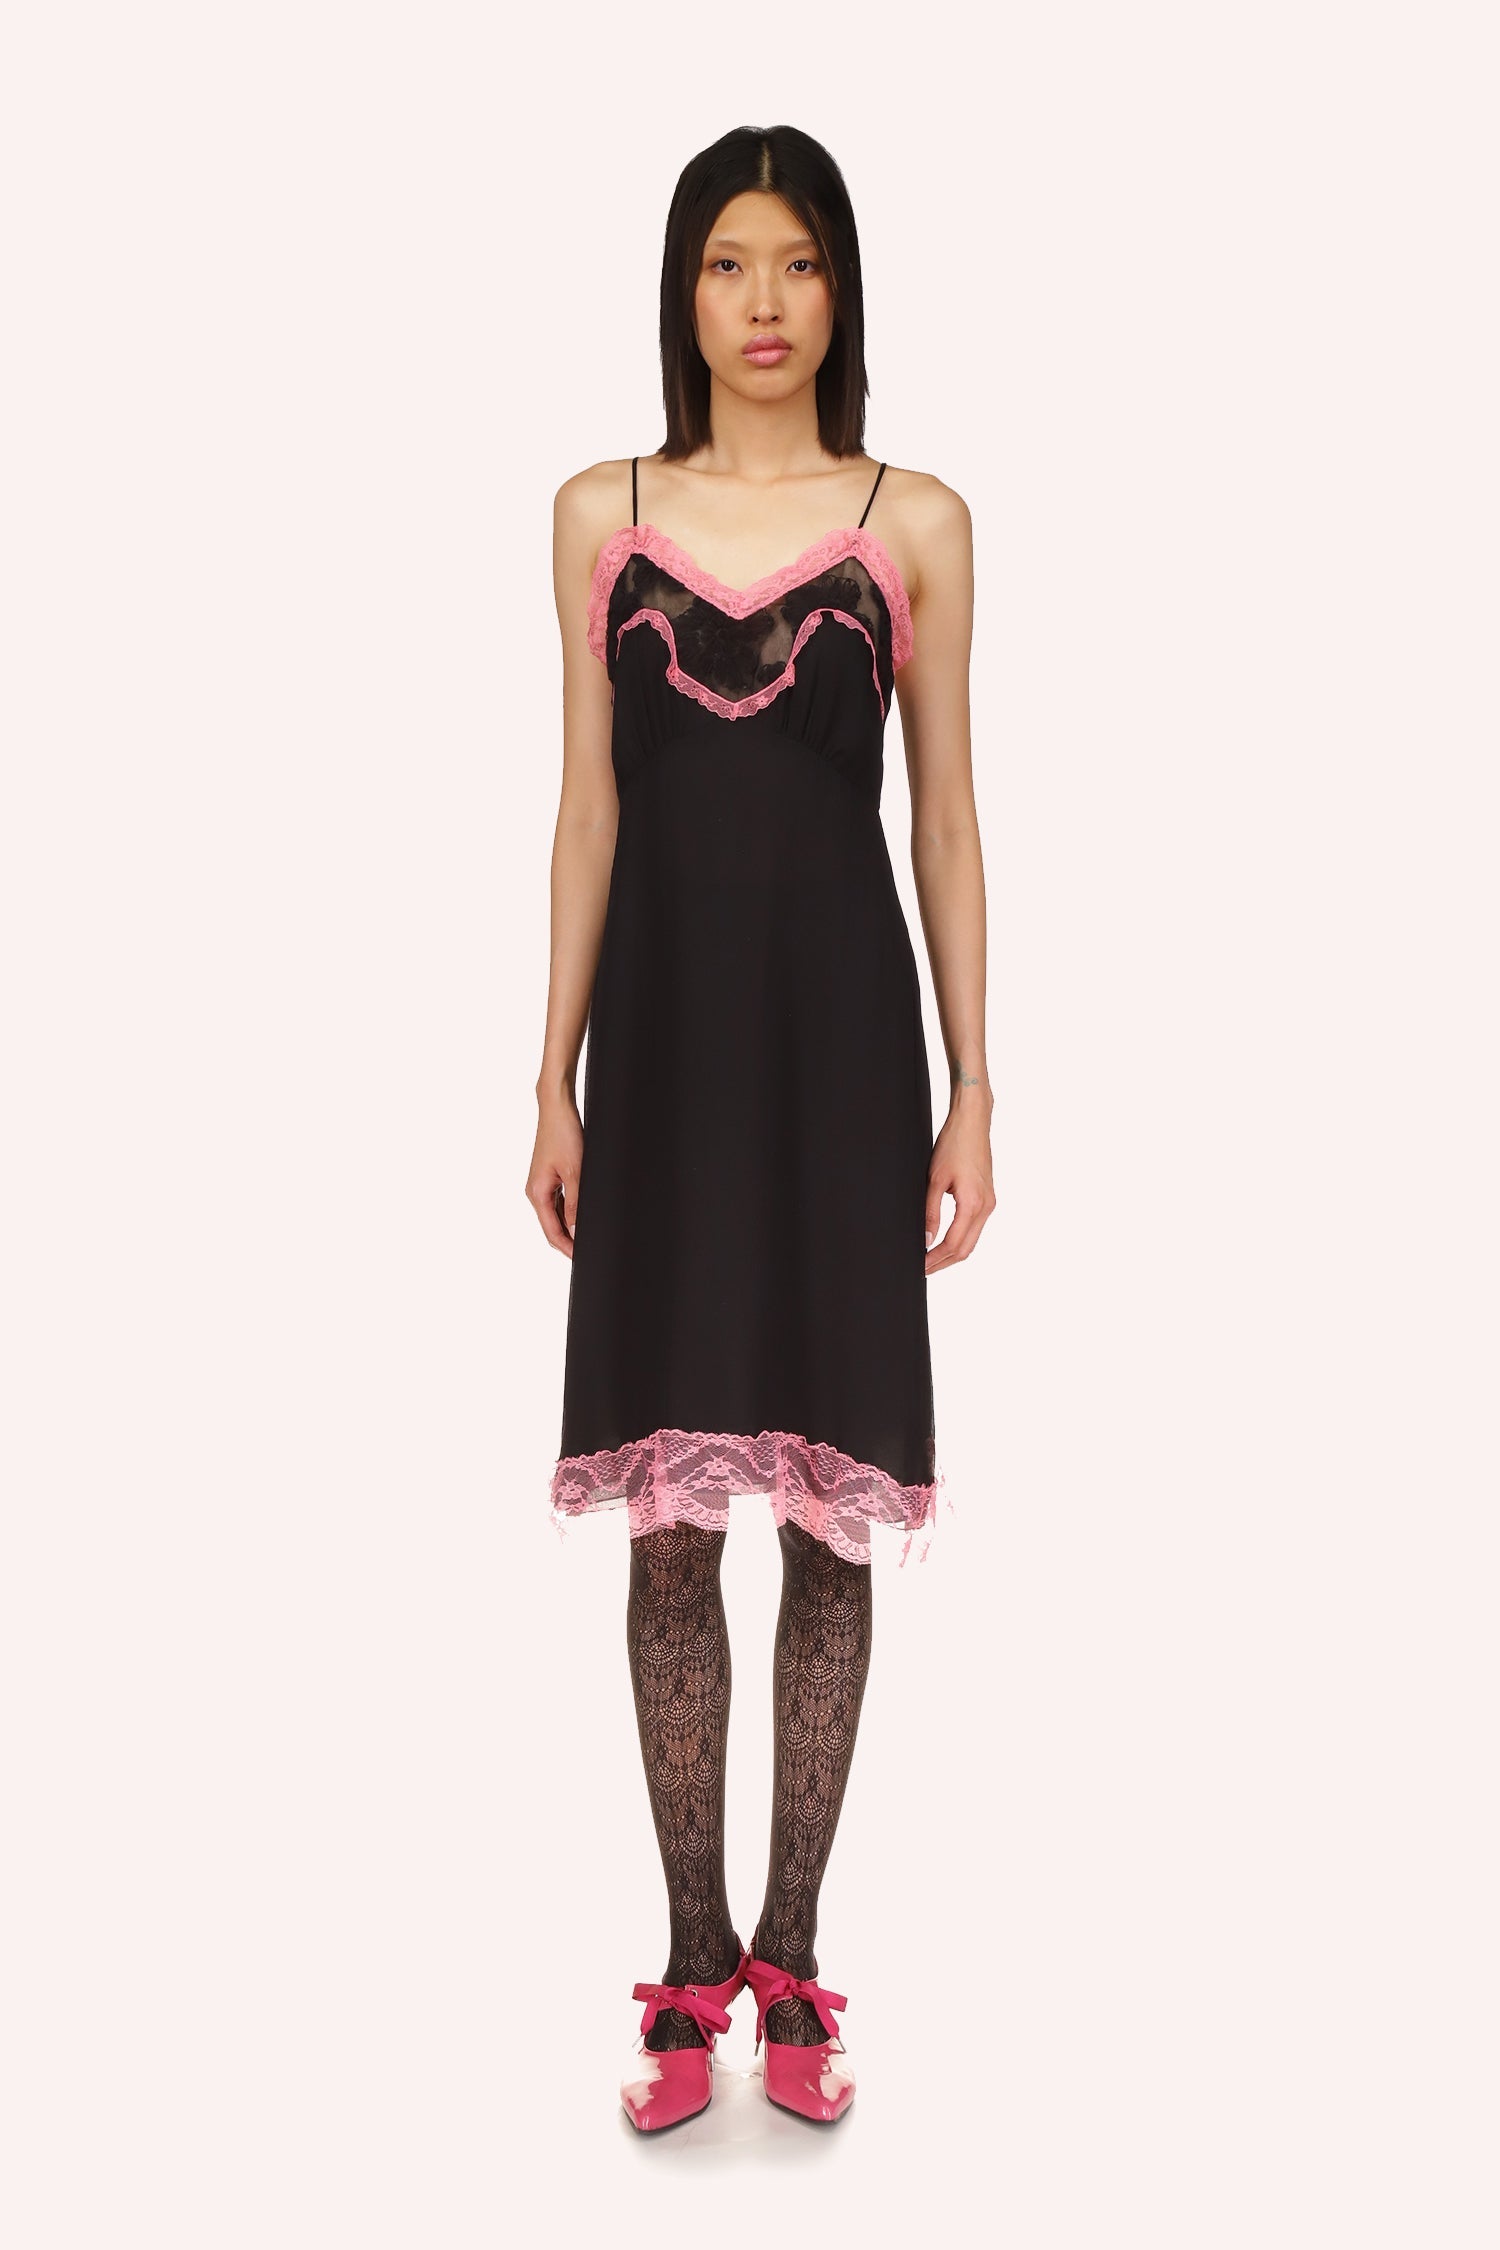 Black dress, pink rim, a black floral see-through between the pink, sleeveless, 2 straps, knee-long